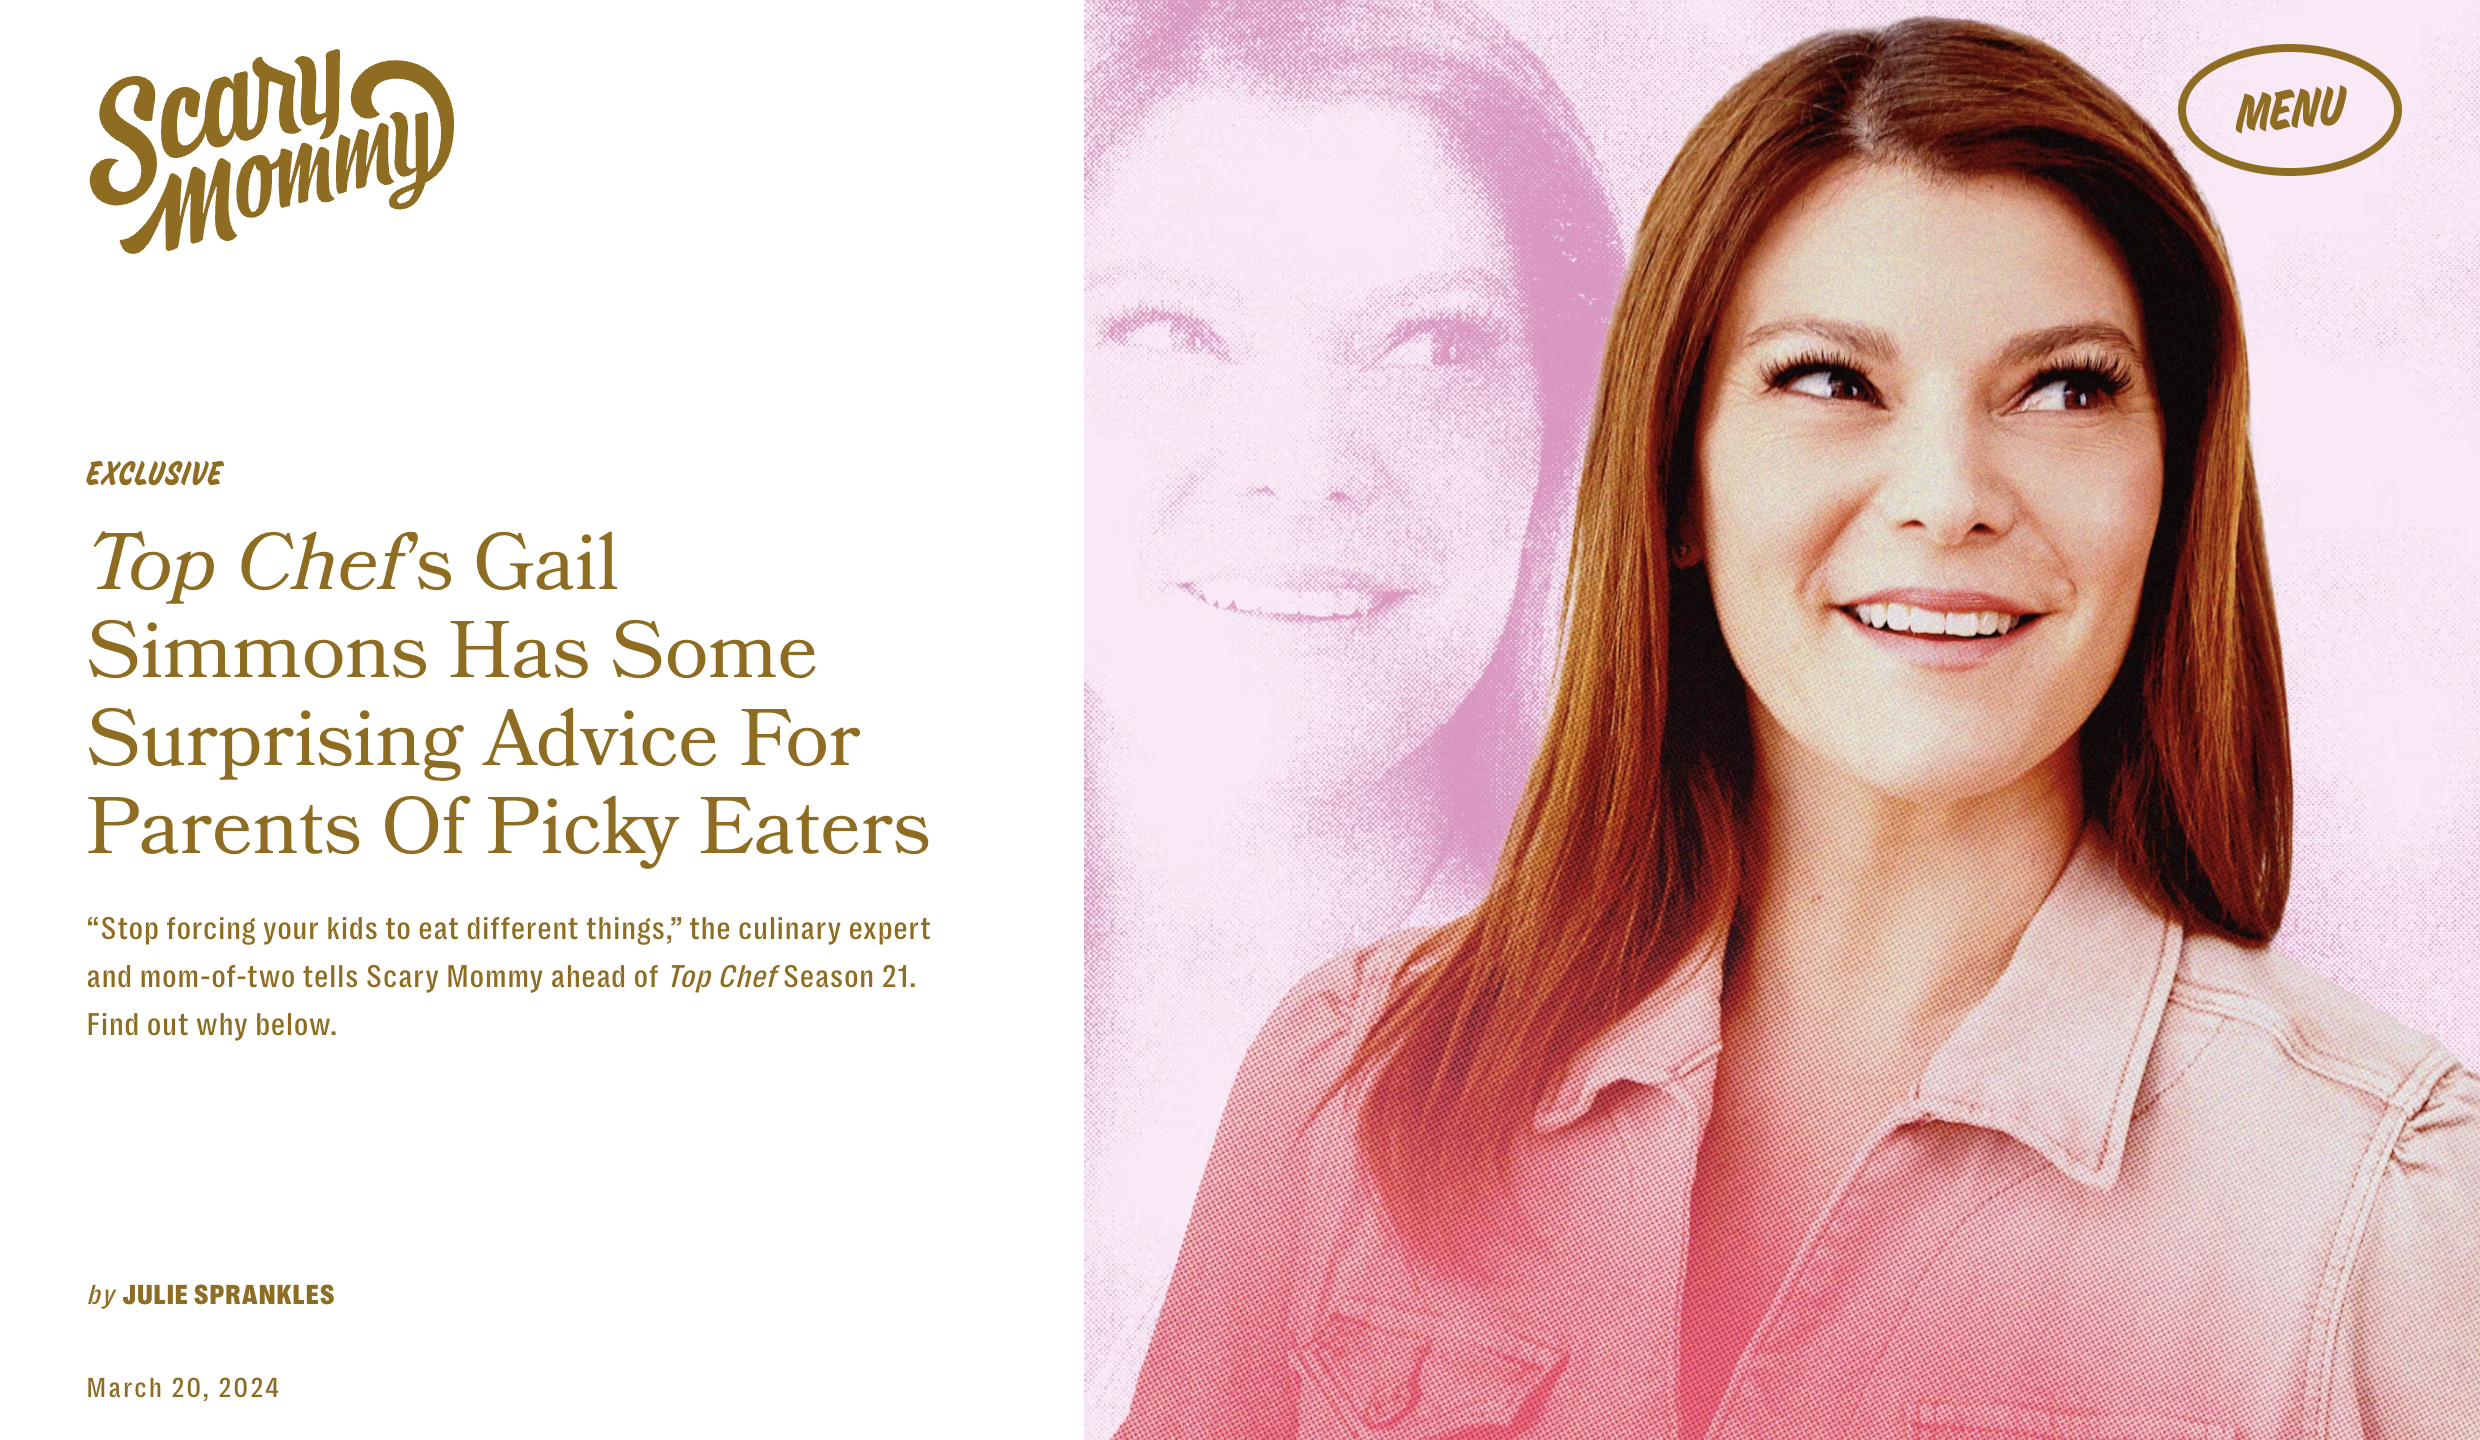 Top Chef’s Gail Simmons Has Some Surprising Advice For Parents Of Picky Eaters